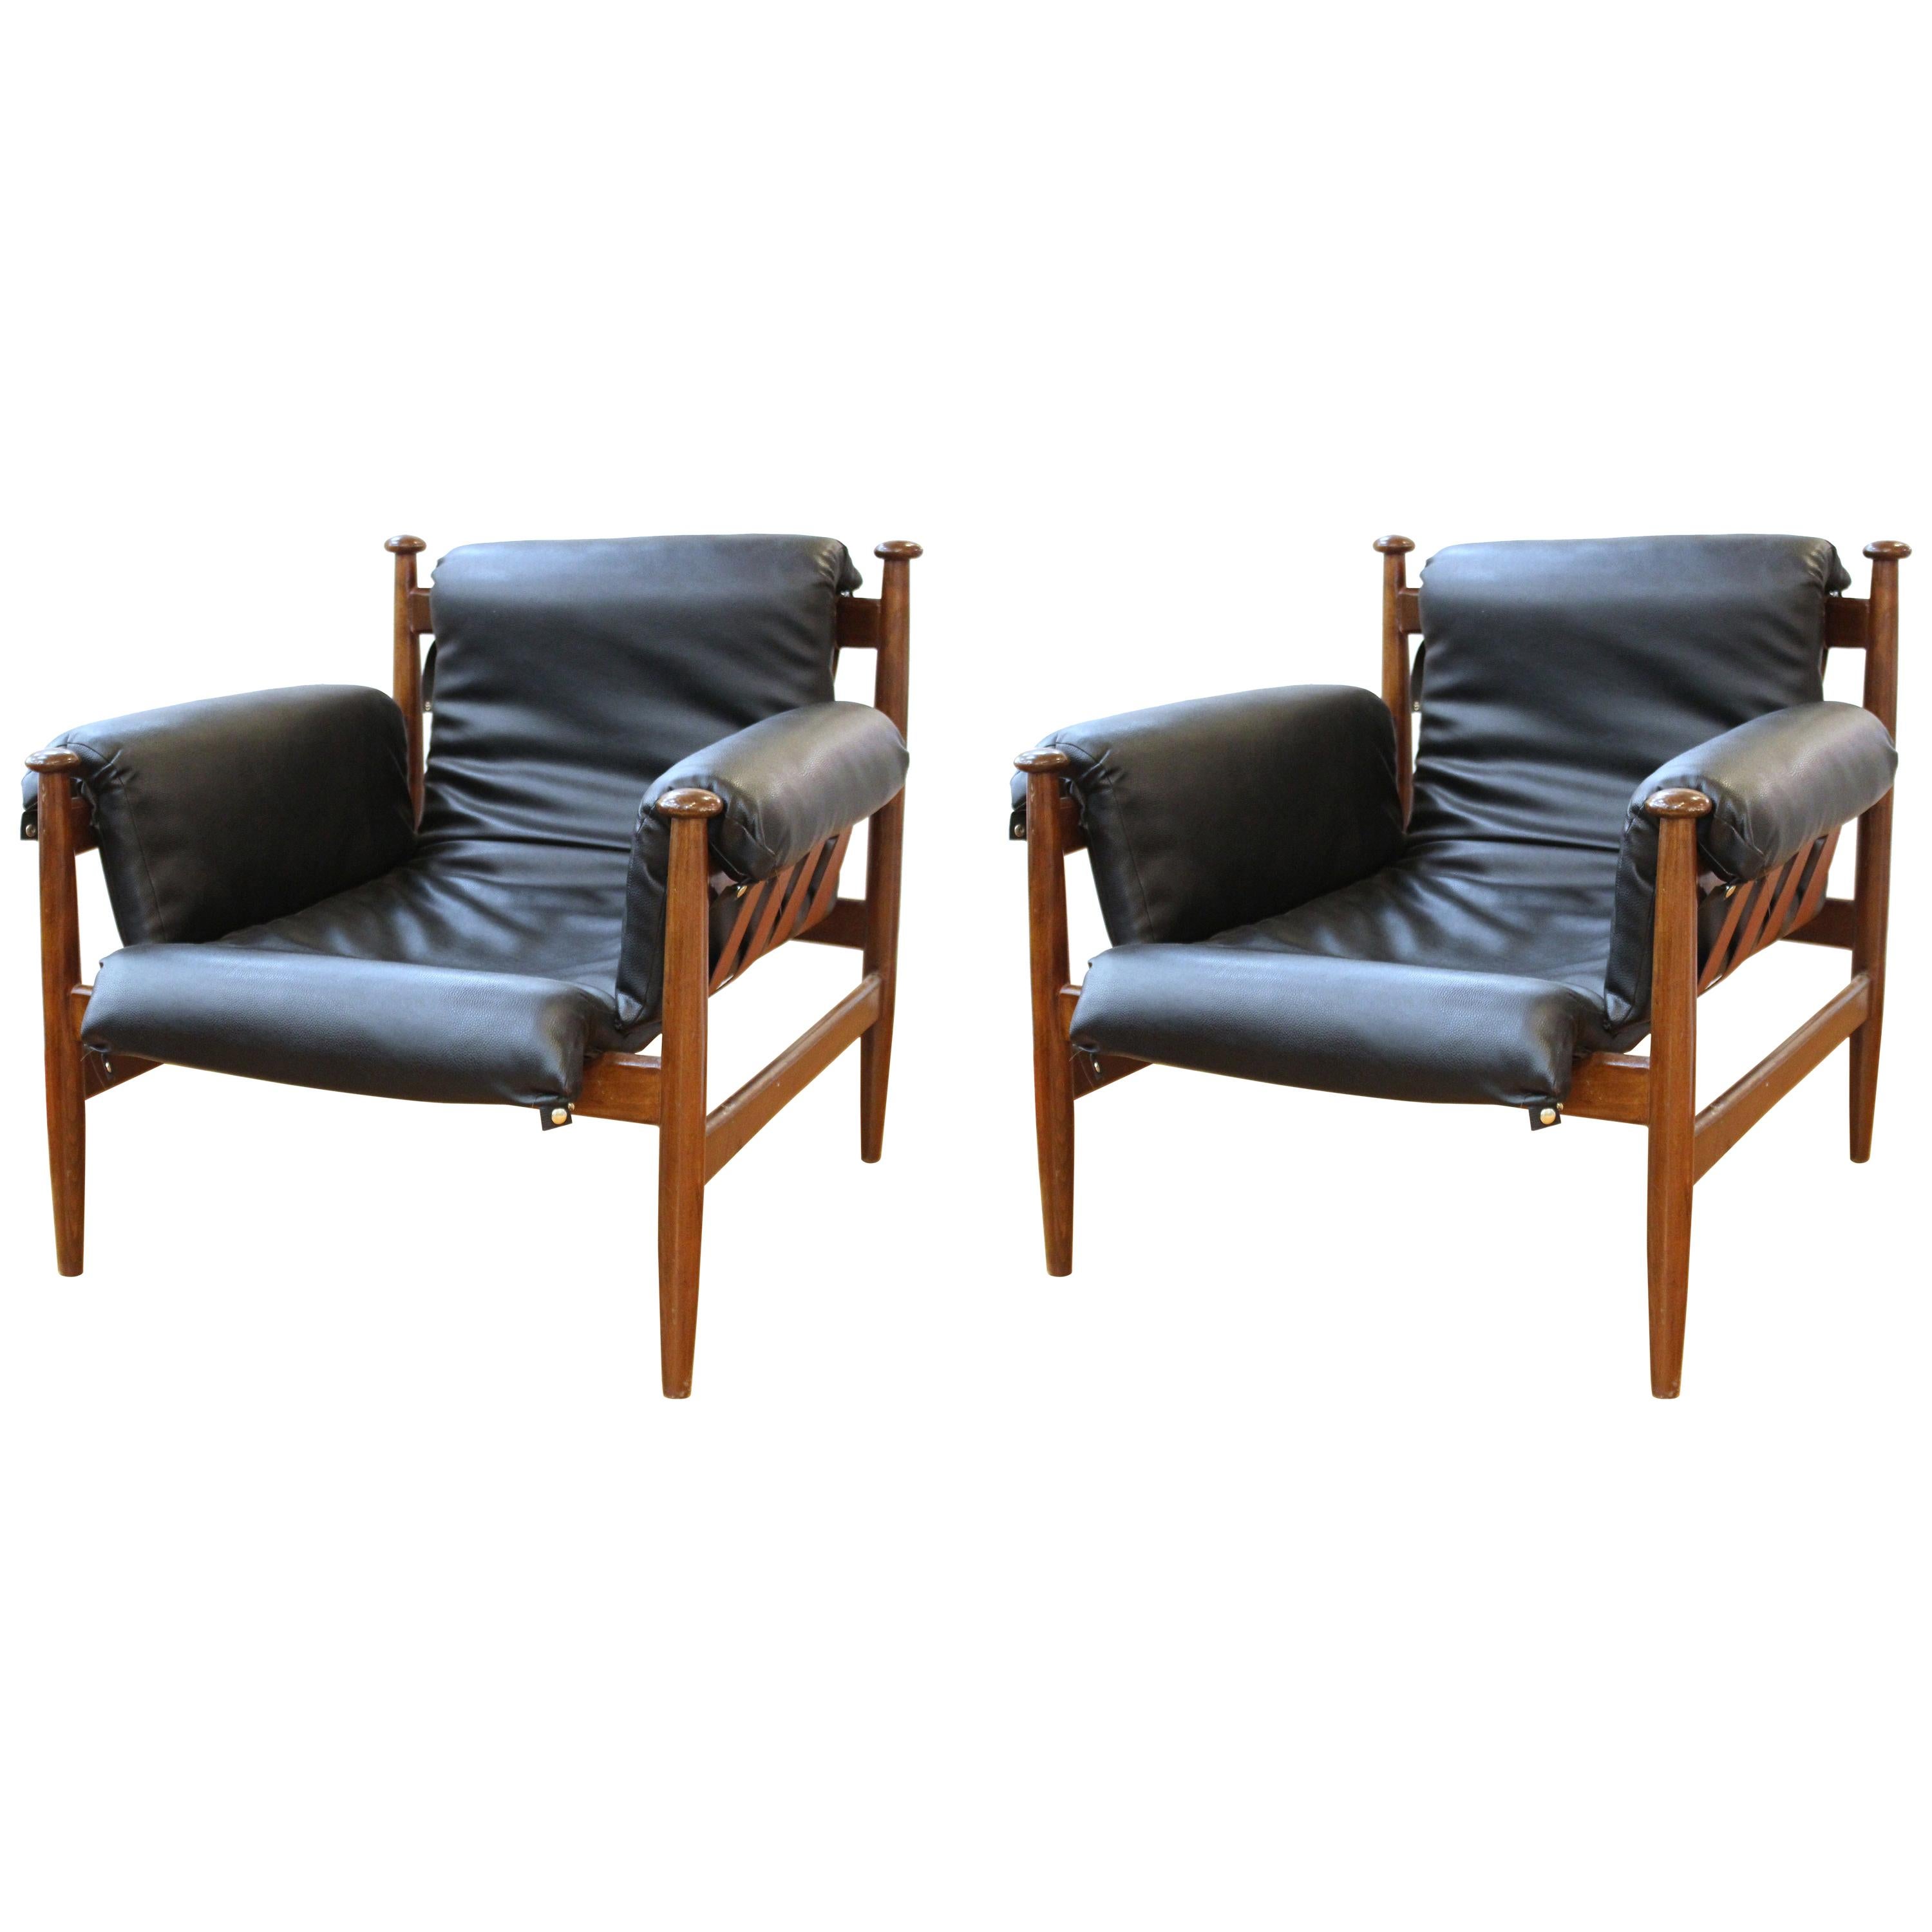 Mid-Century Modern Lounge Chairs or Armchairs with Wooden Frame